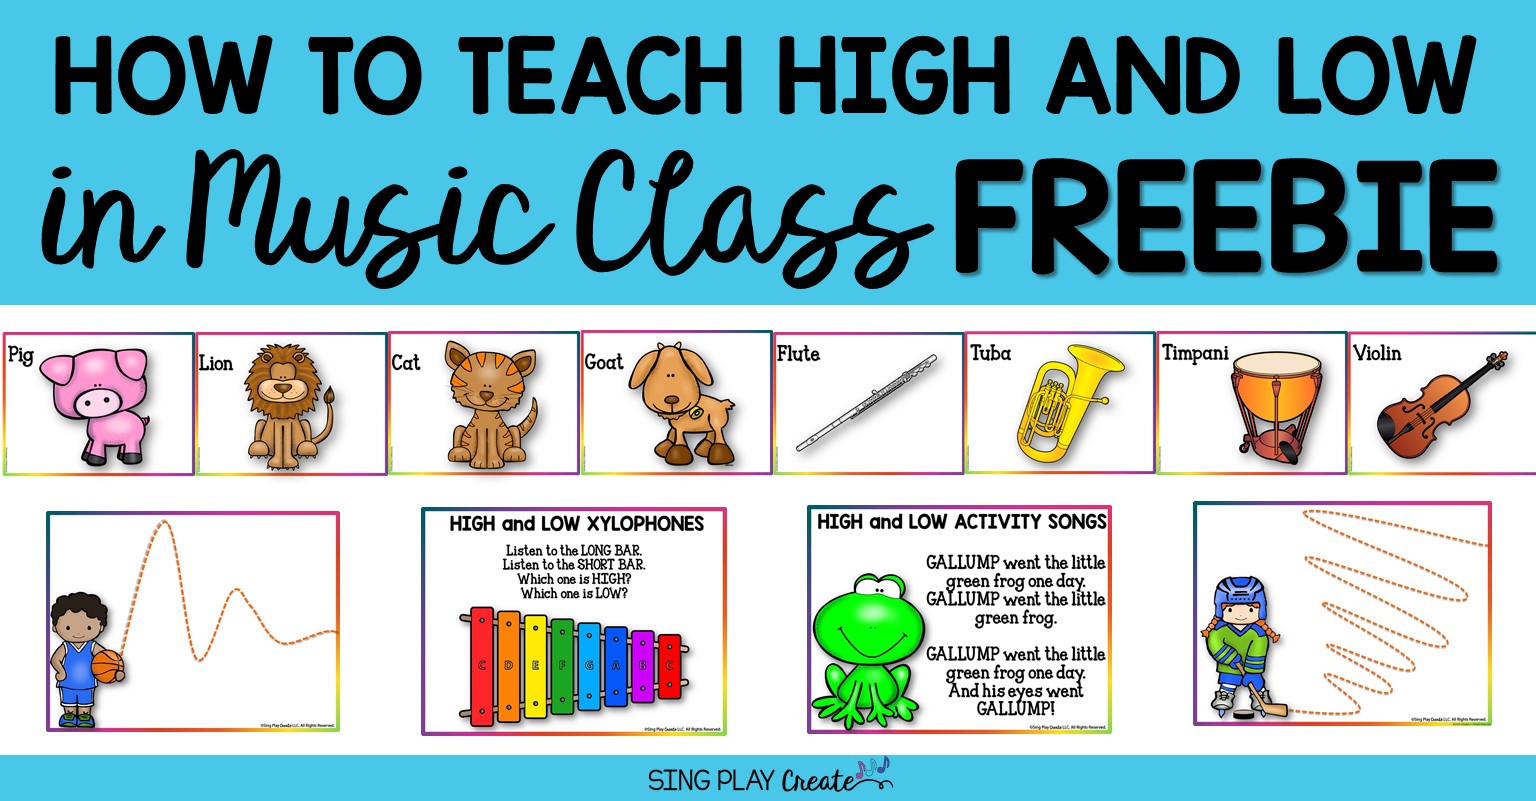 How To Teach High And Low In Music Class